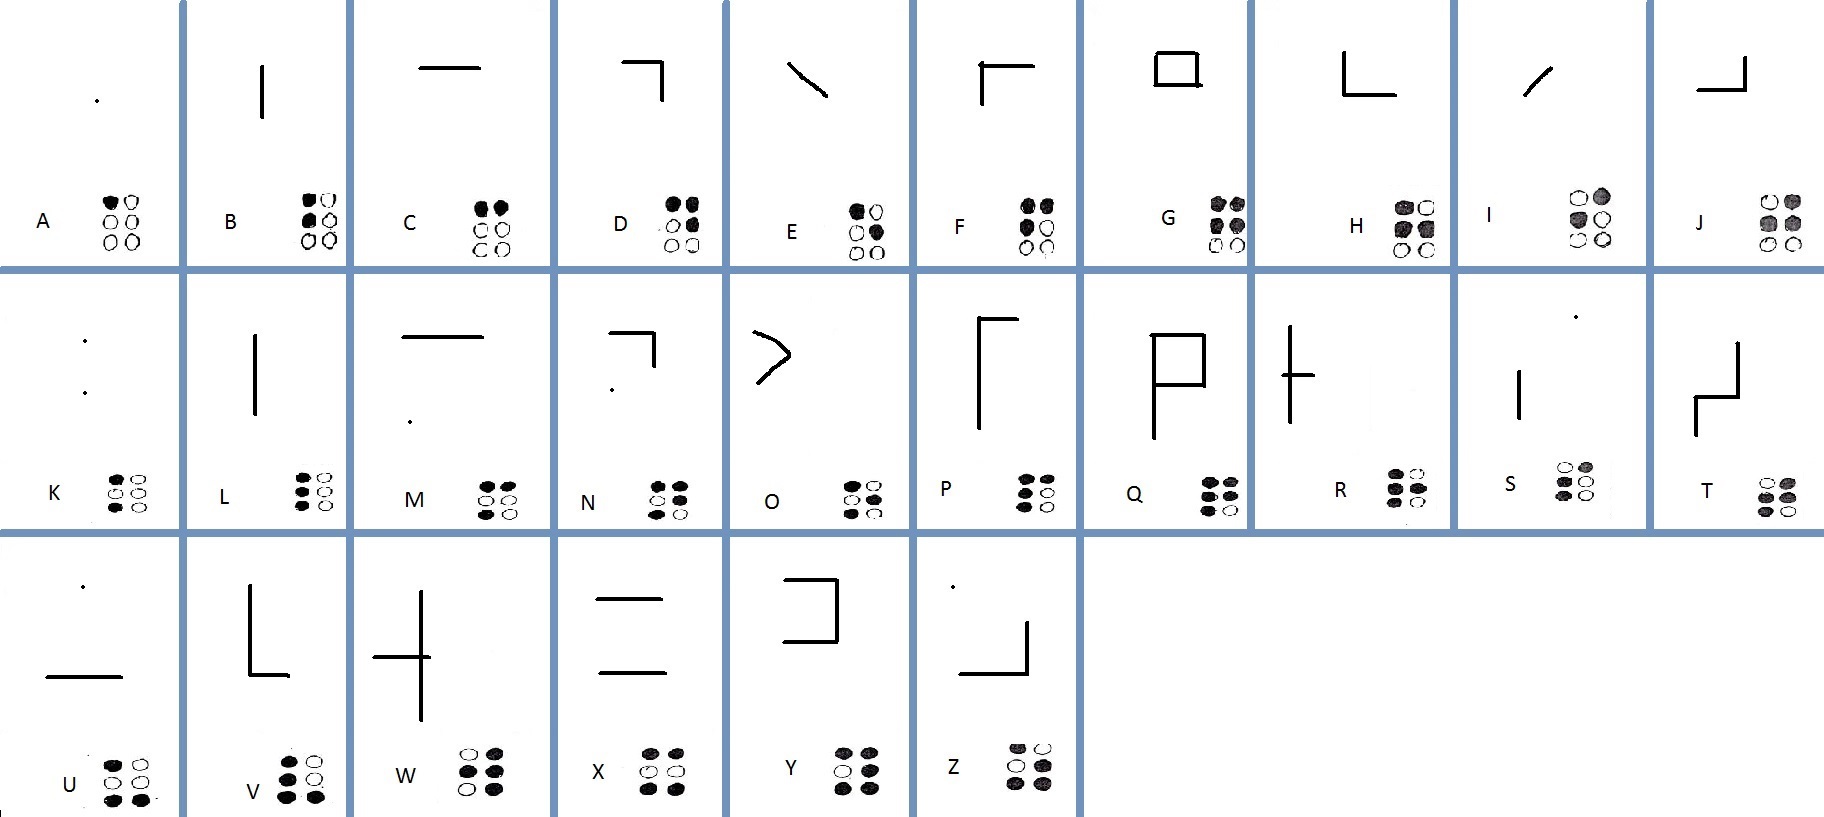 Braille alphabet with the corresponding shape for each letter